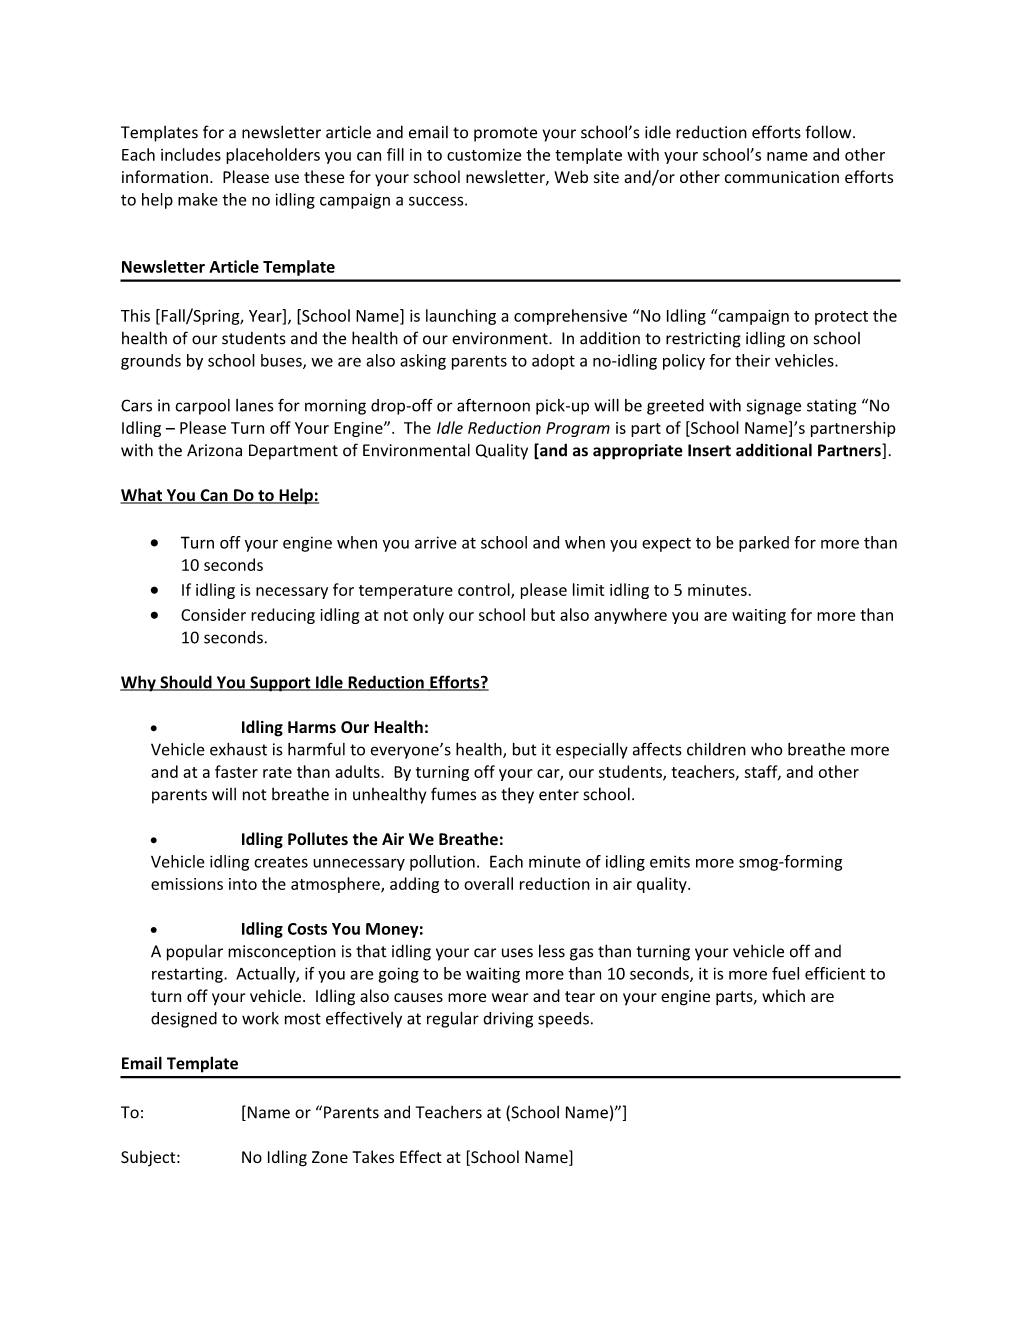 Newsletter Article Template s1